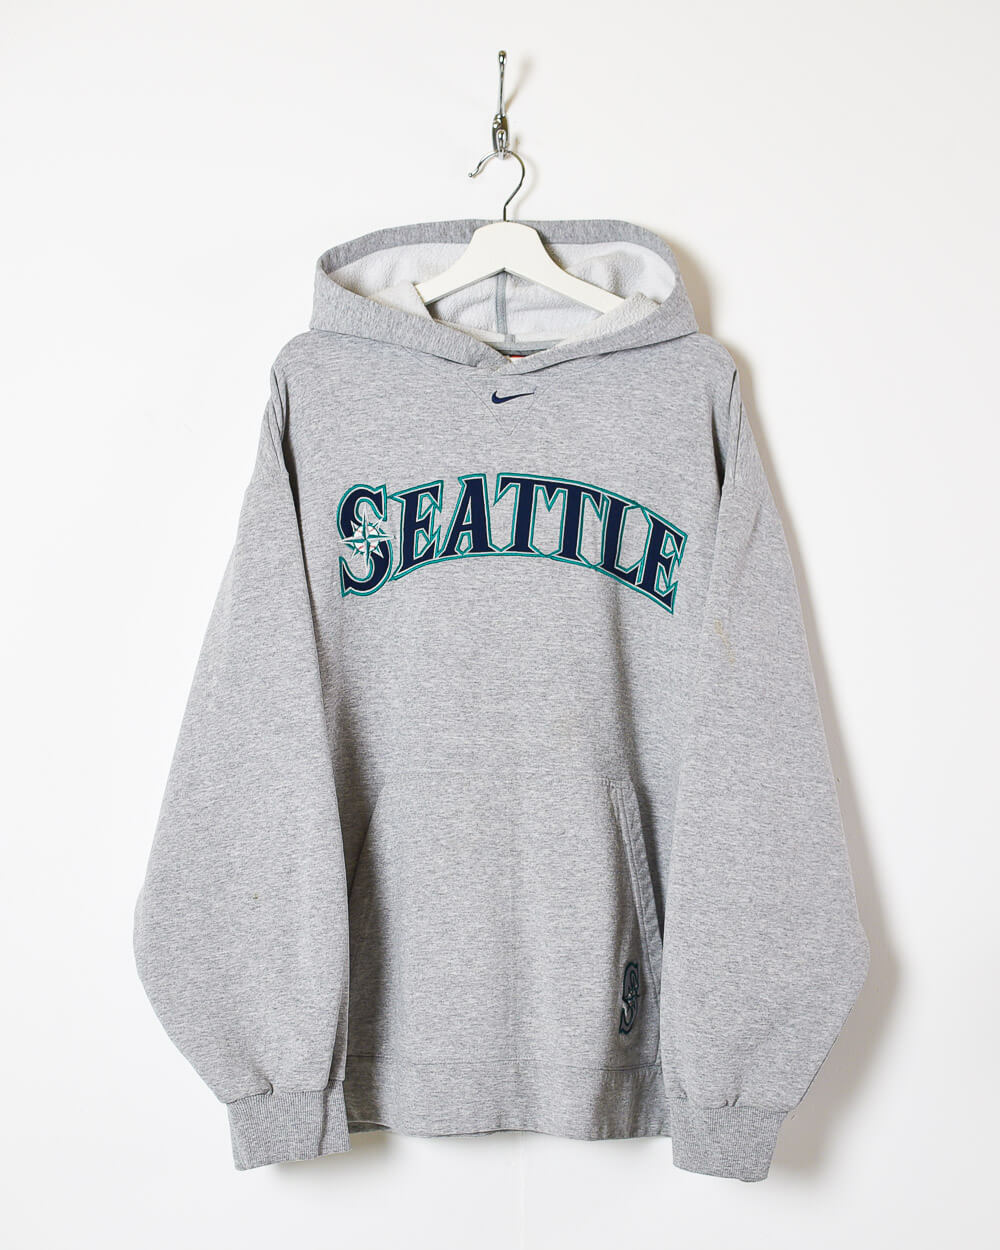 2005 Seattle Mariners Hoodie size XXL (29x31) for $50 available